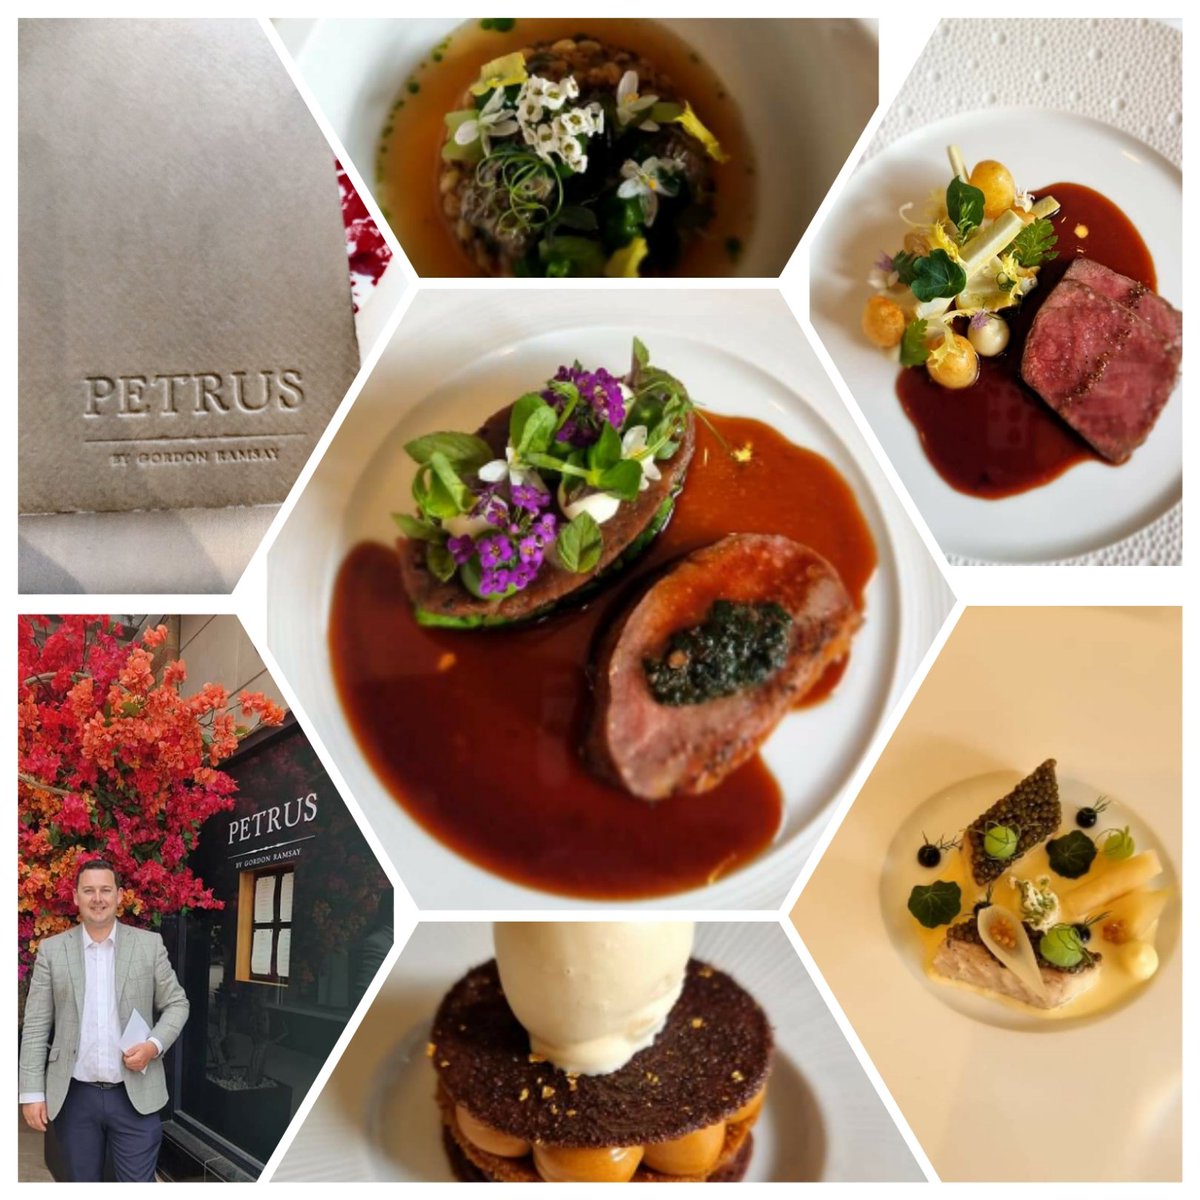 Another wonderful day in London, Pertus By Gordon Ramsay was simply perfection, followed by a wonderful walk about town. 

 #London #luxurylifestyle https://t.co/GDsuj9sYlW